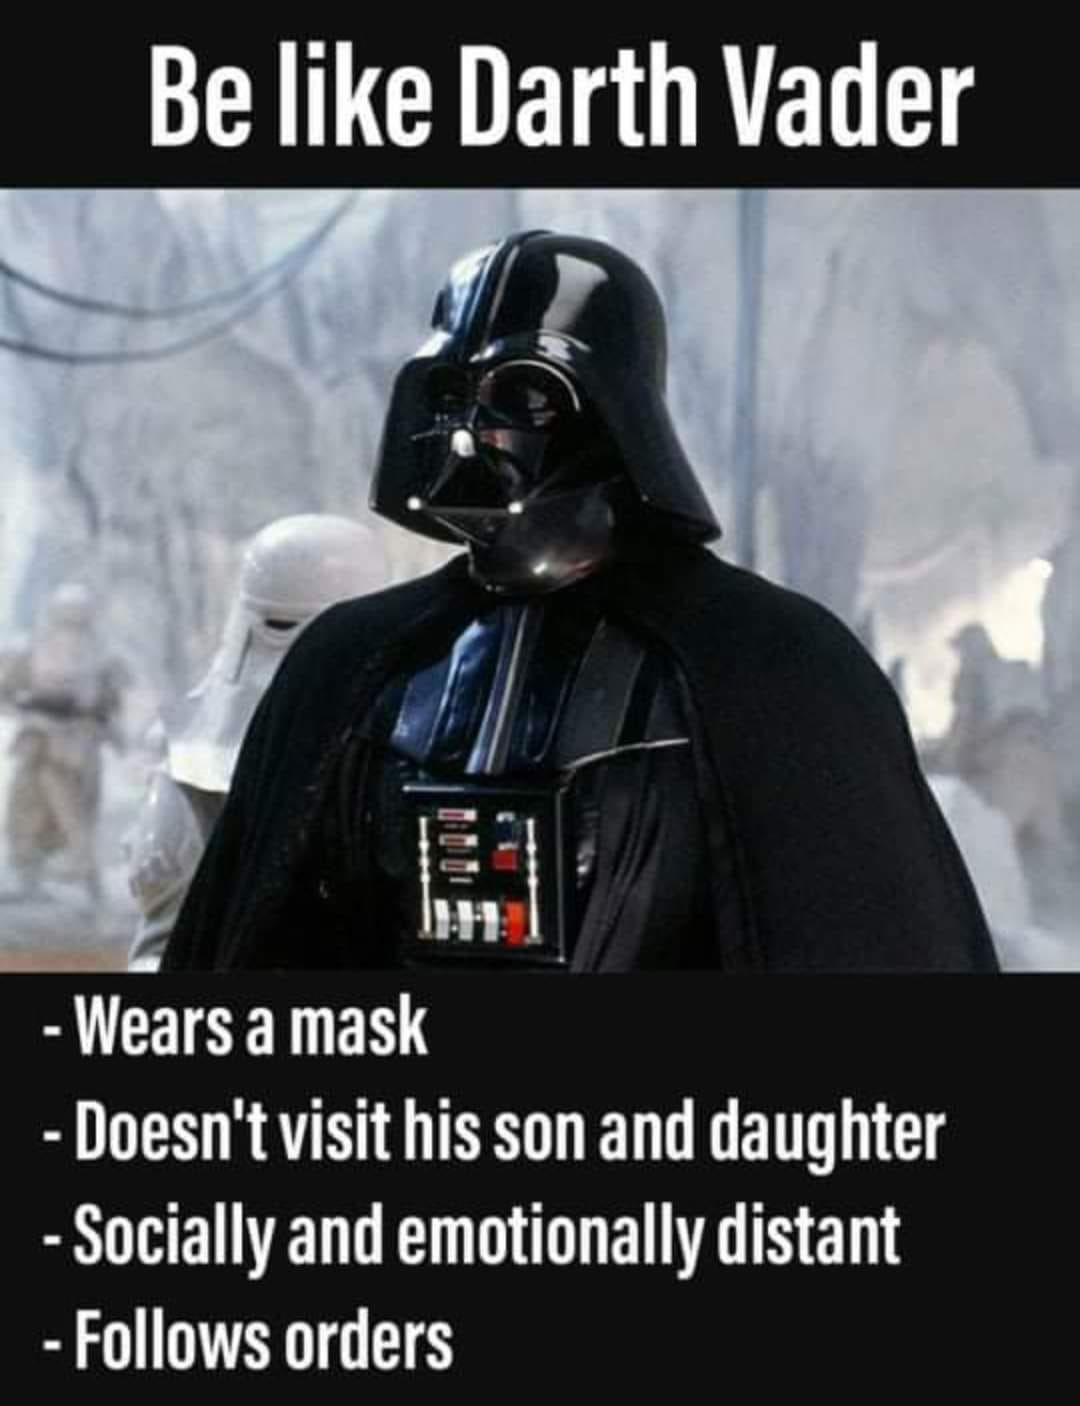 Be like Darth Vader: - Wears  mask - Doesn't visit his son and daughter - Socially and emotionally distant - Follow orders